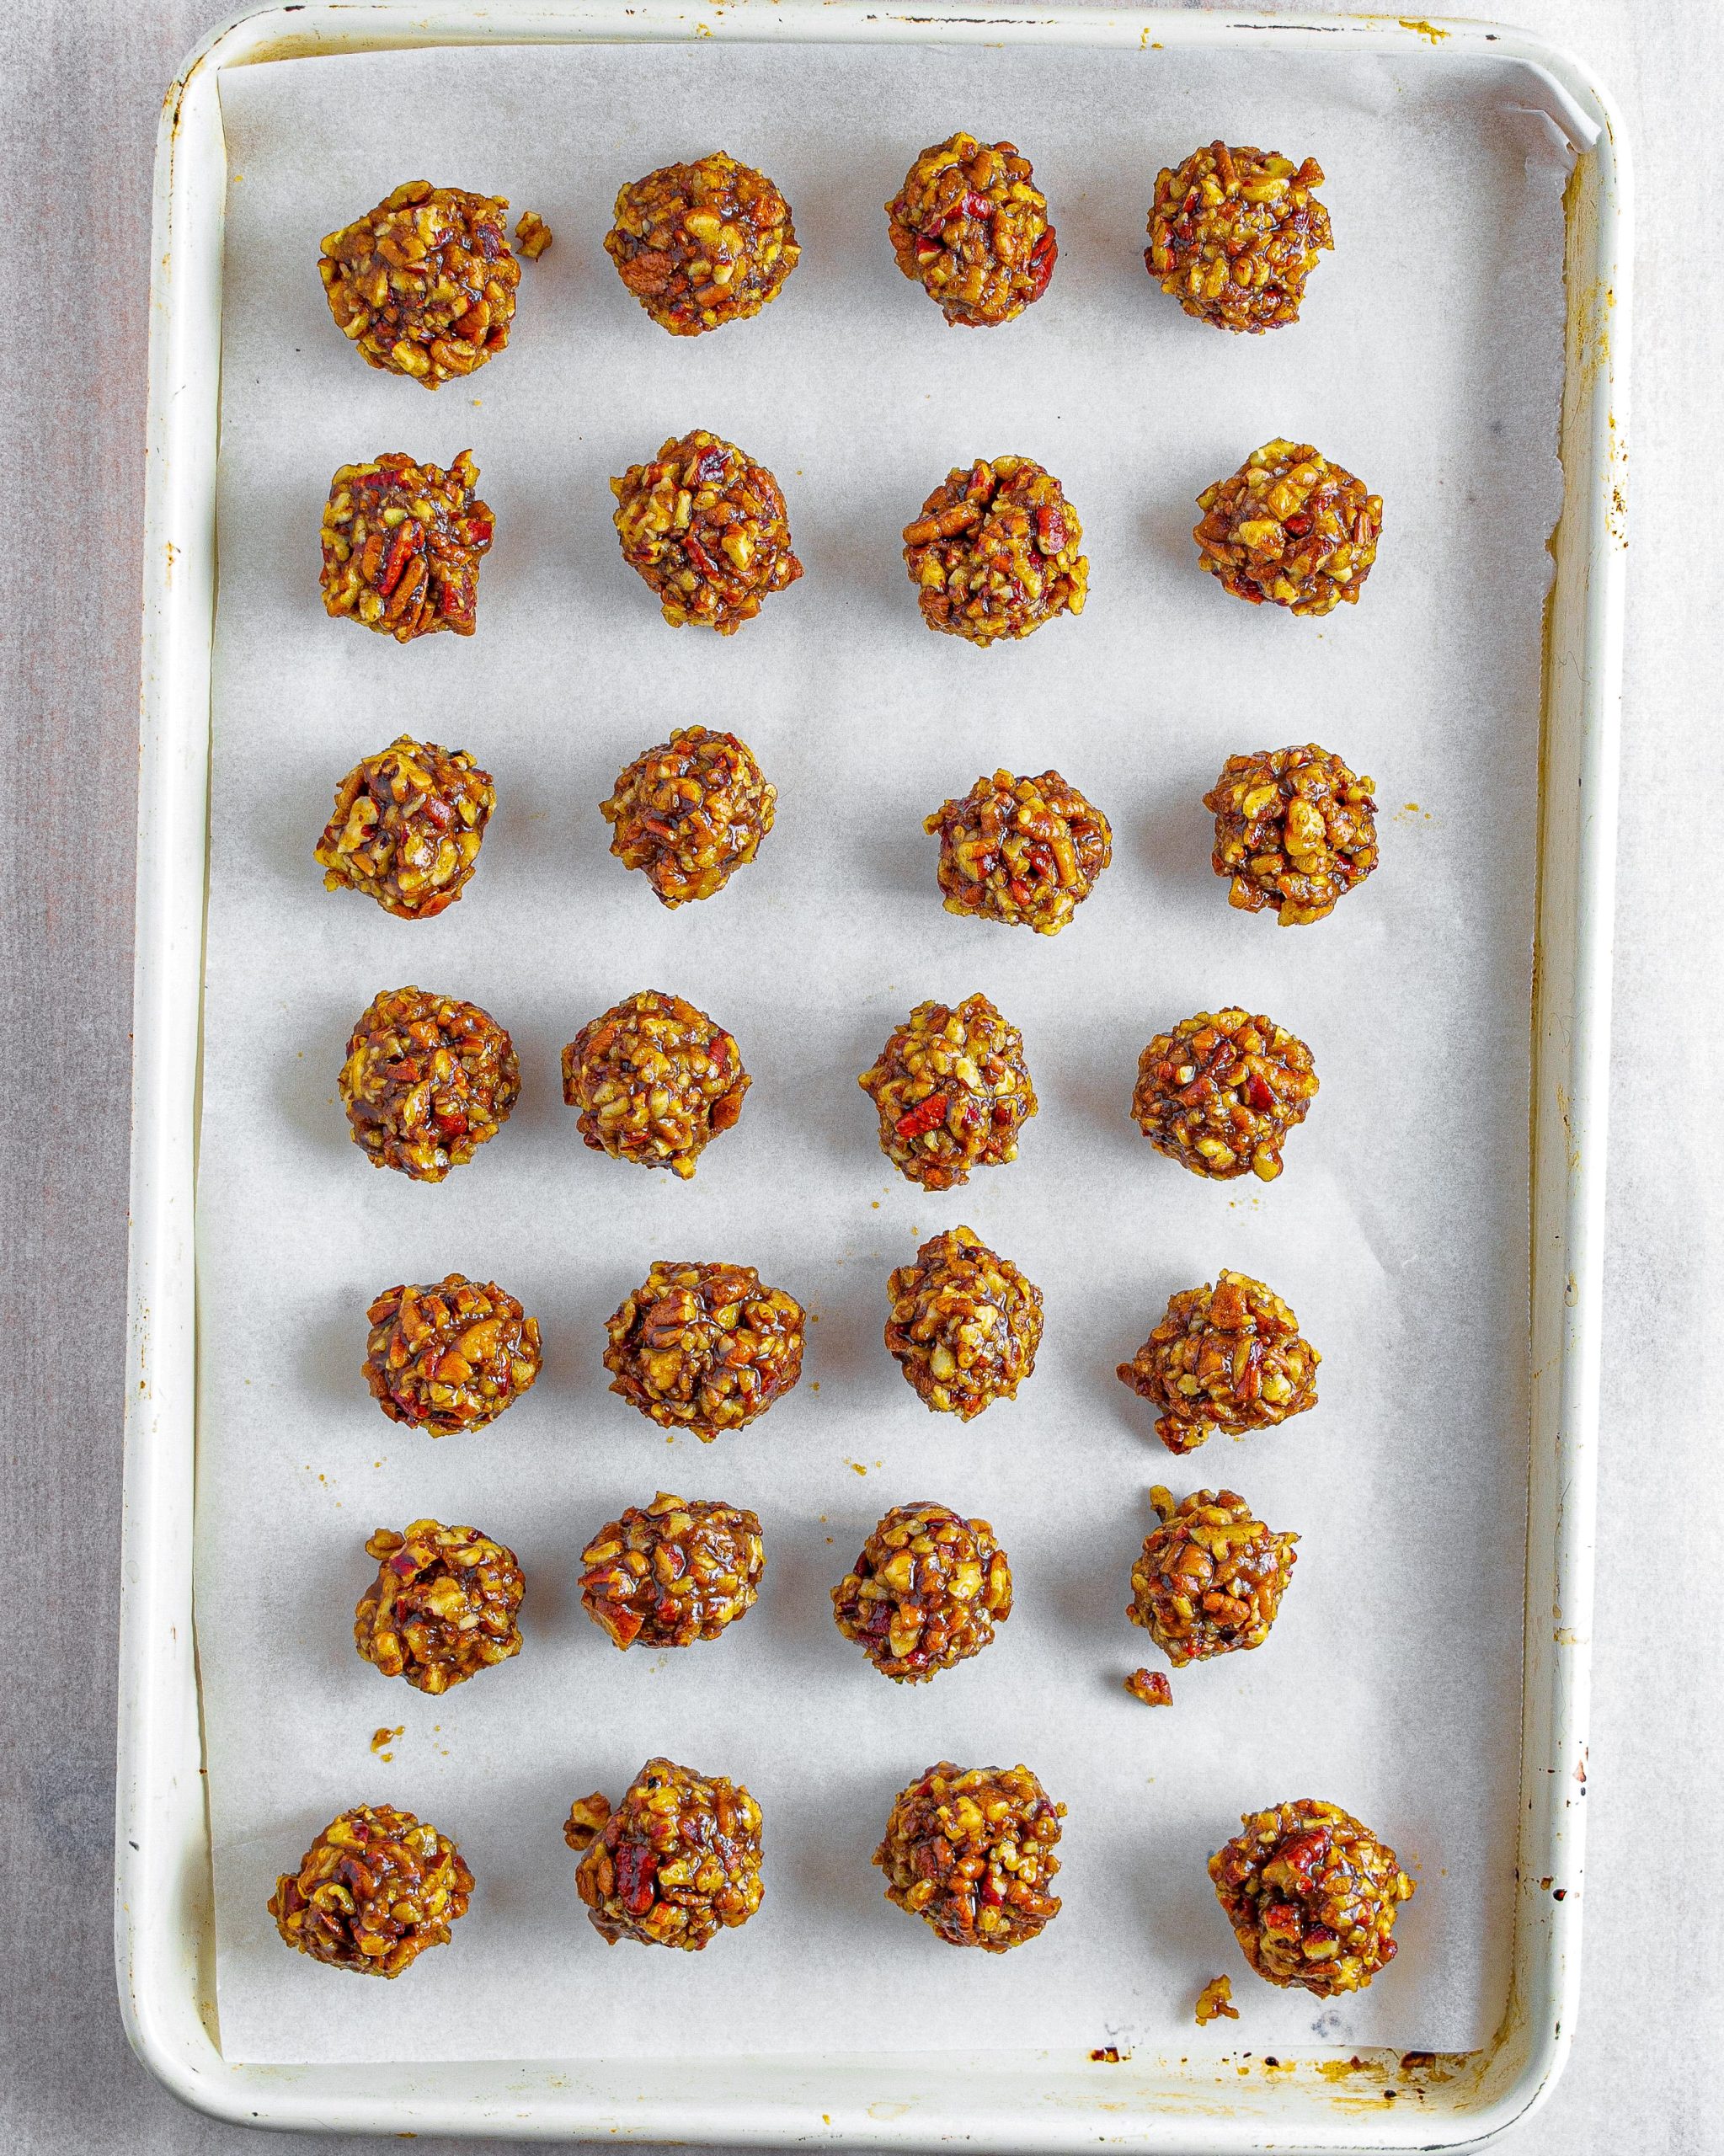 Form the mixture into 30 evenly sized balls and place into the freezer to chill on a parchment-lined baking sheet for 1 hour.